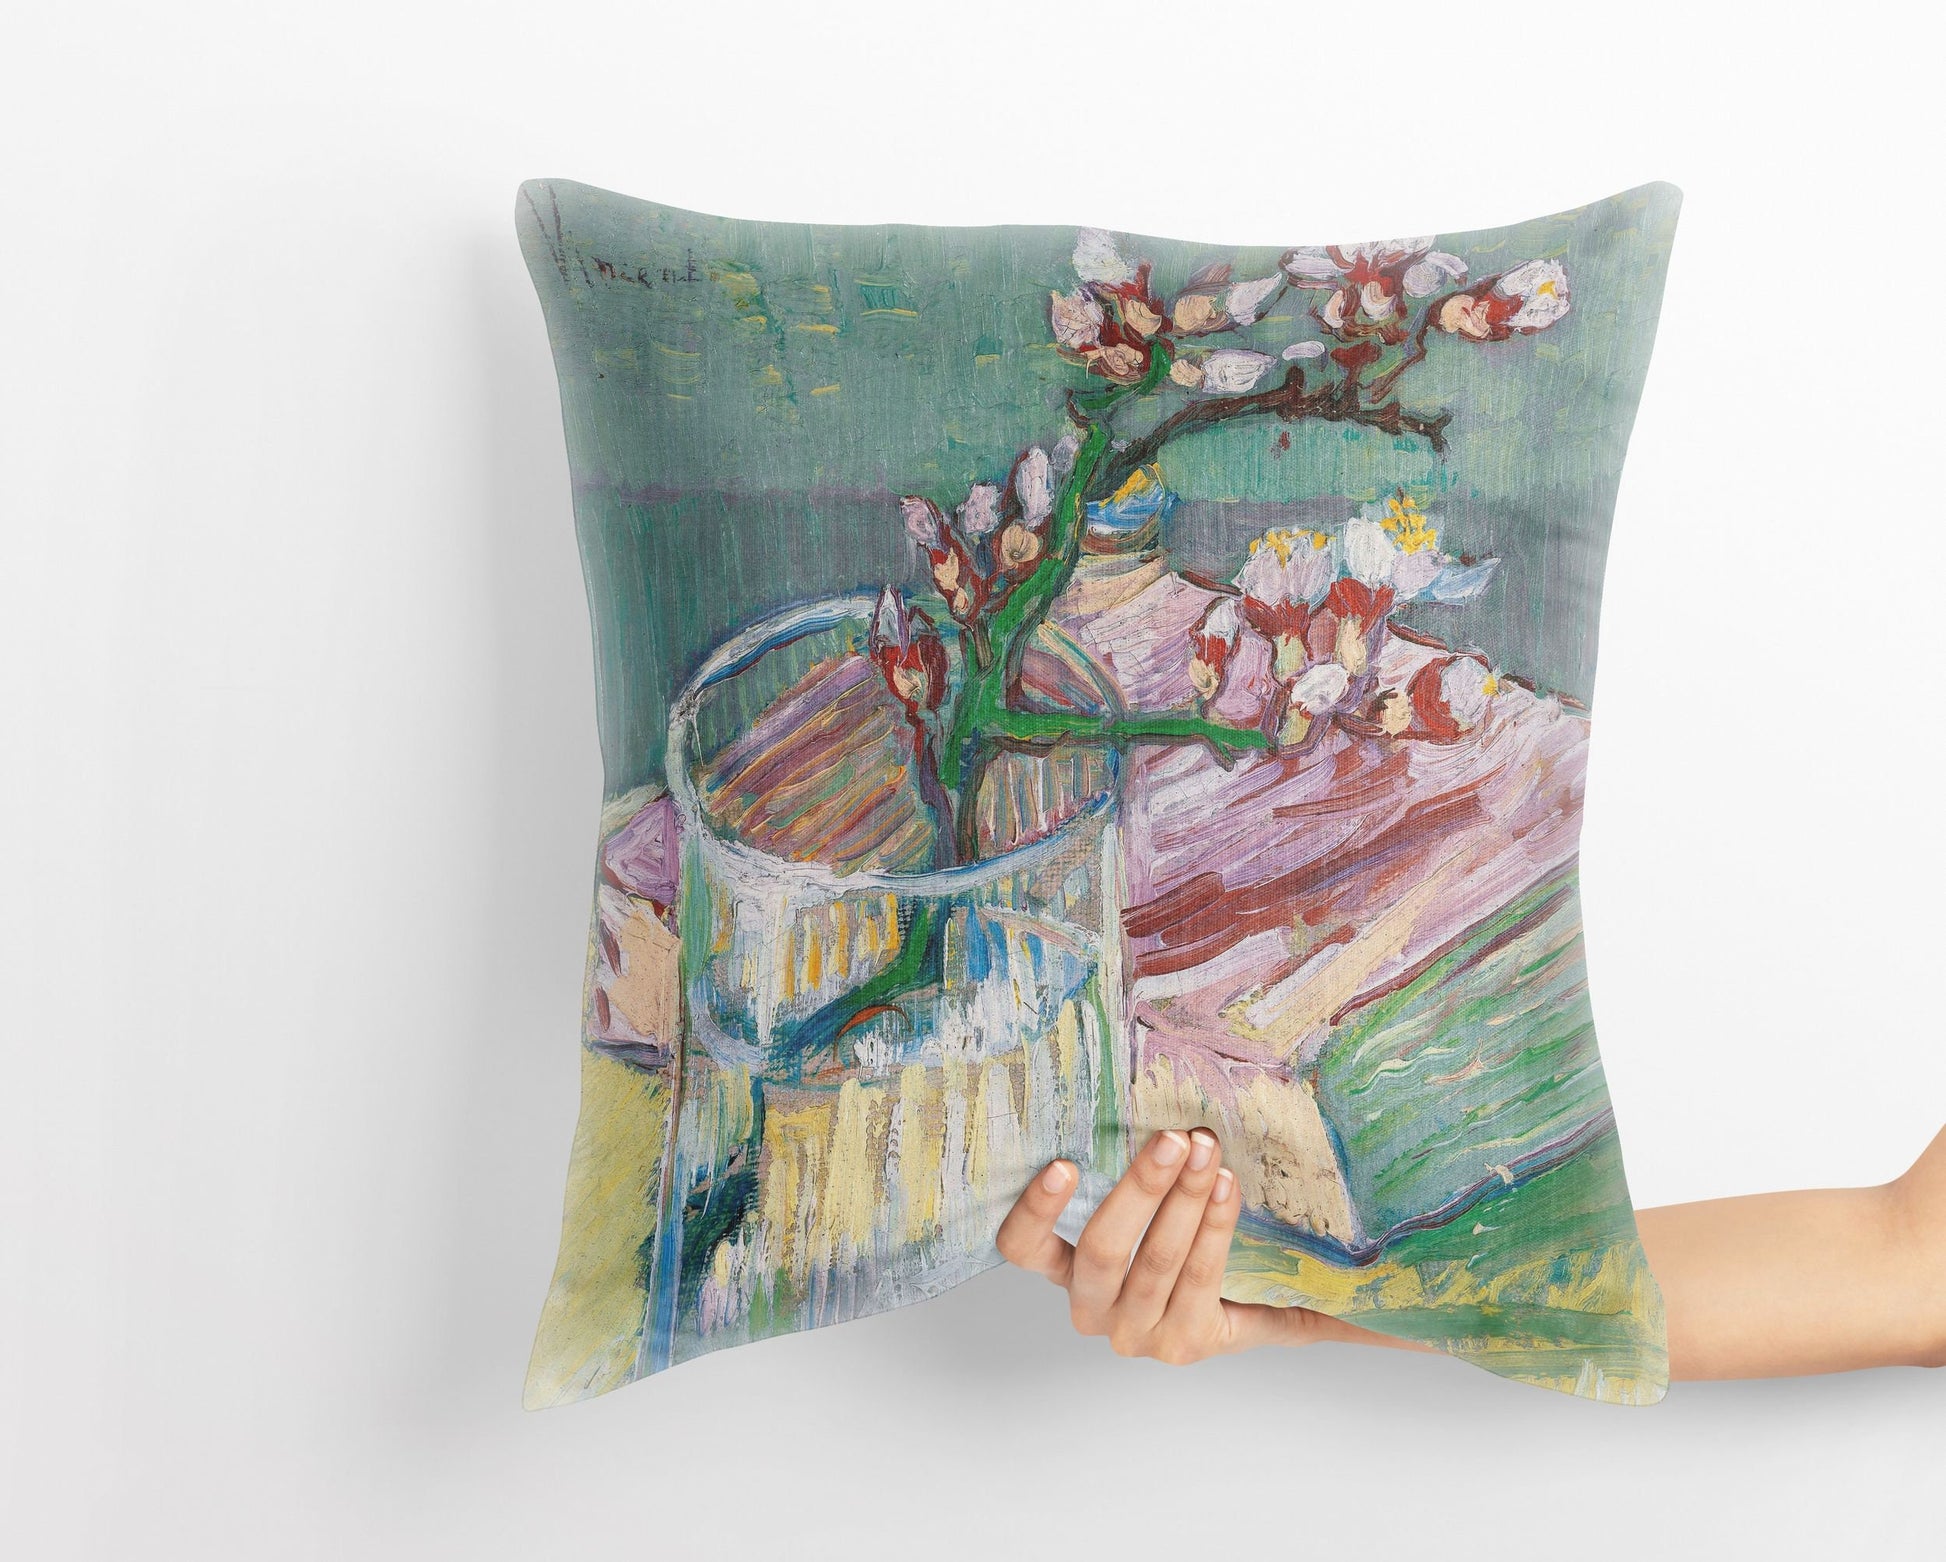 Vincent Van Gogh Famous Art Blossoming Almond Branch In A Glass With A Book, Throw Pillow, Designer Pillow,22X22 Pillow Cover